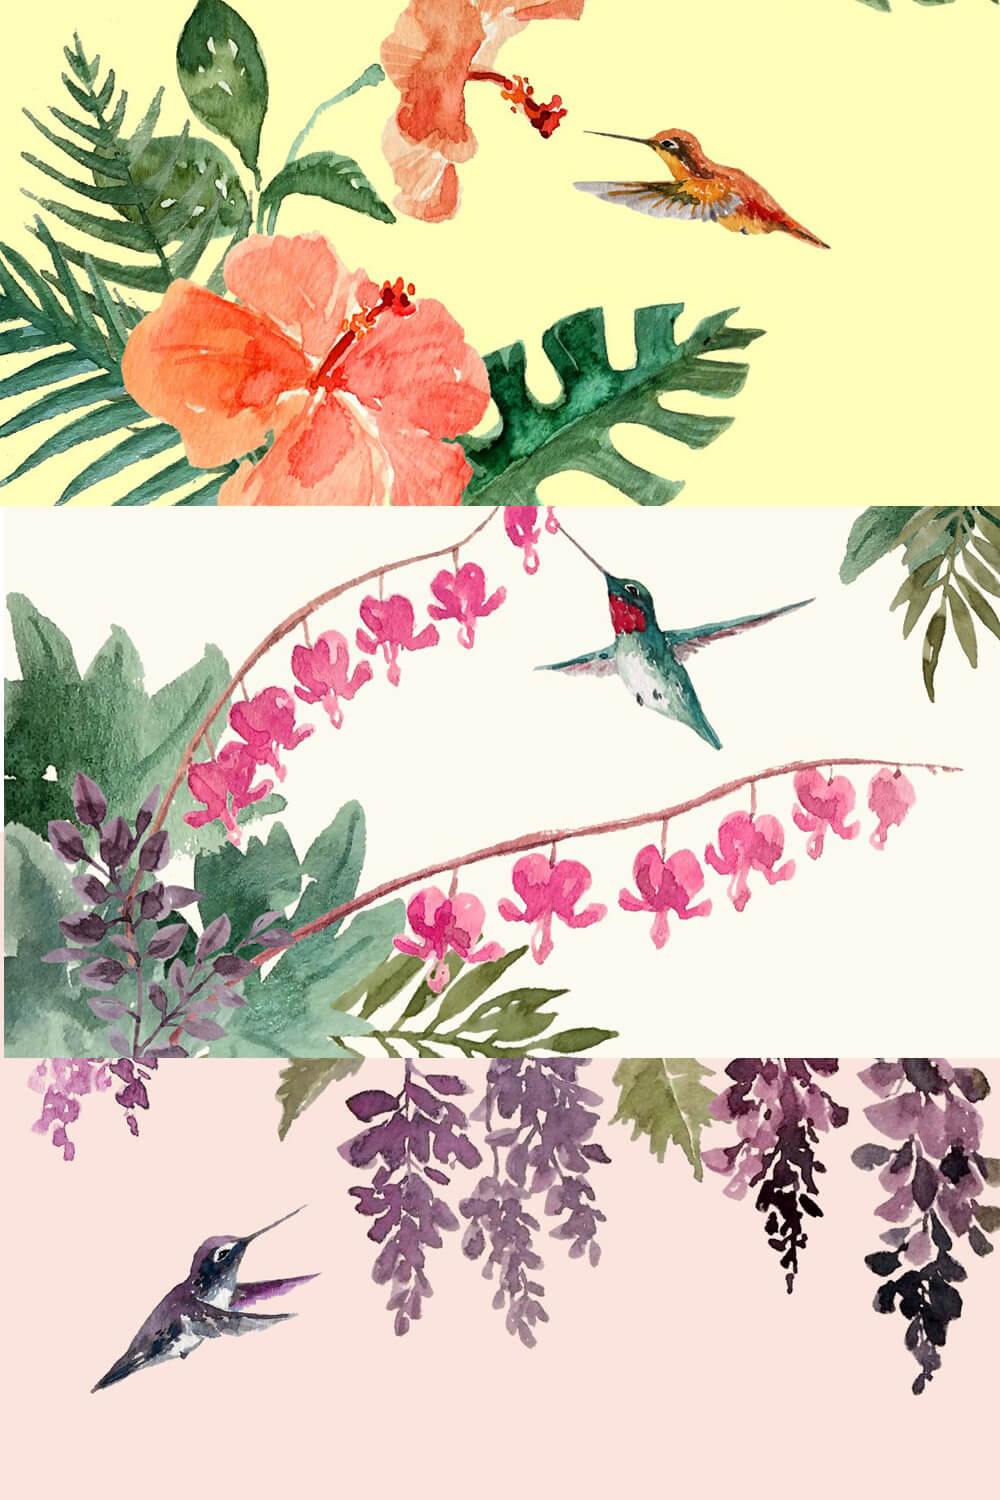 Three drawings of hummingbirds in the garden with different backgrounds.